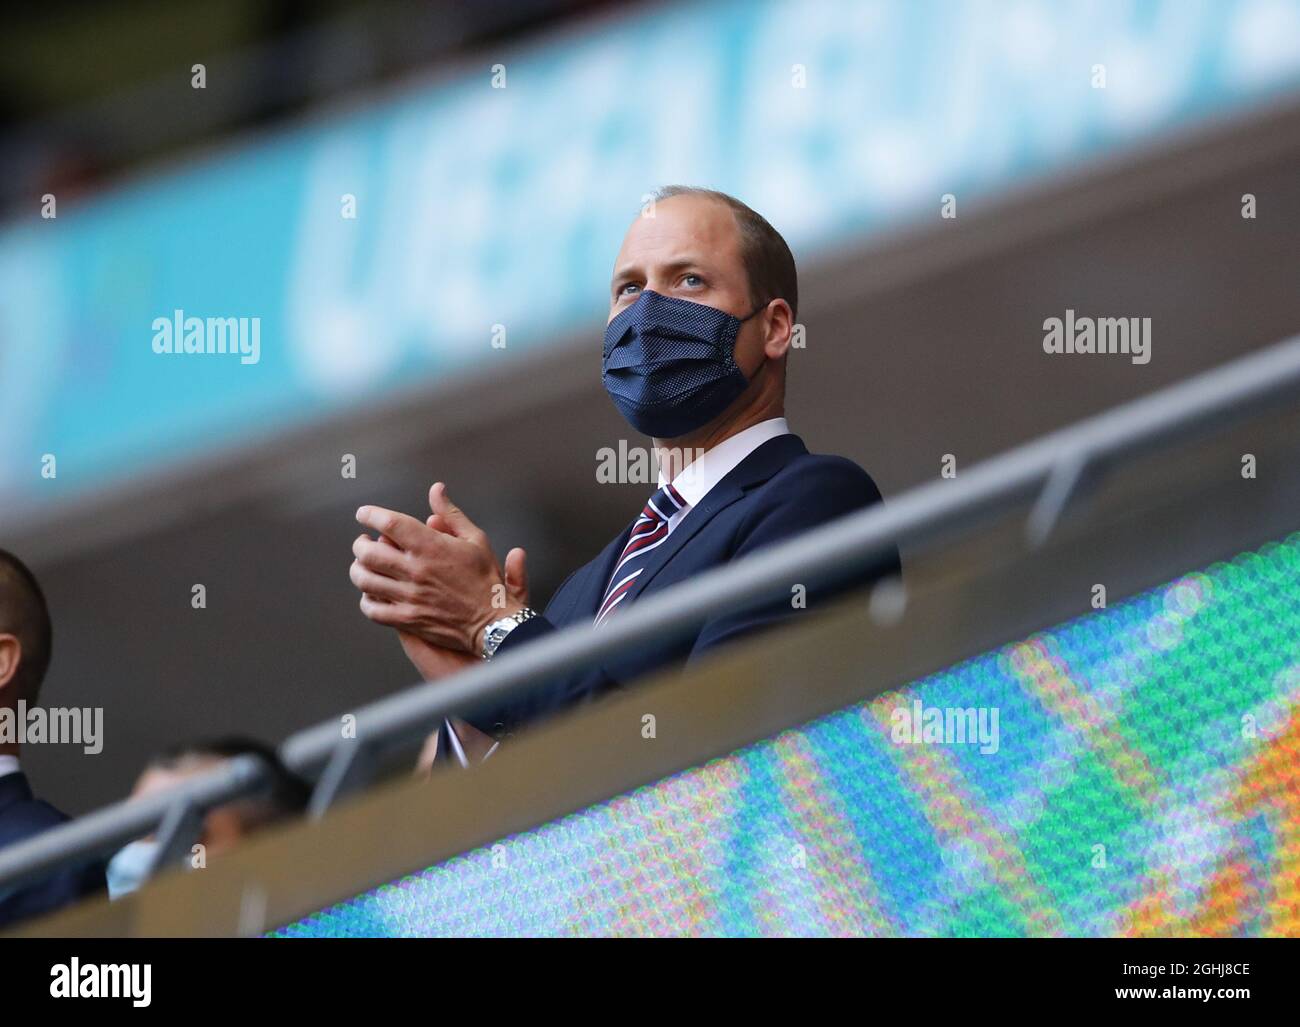 London, England, 22nd June 2021. Prince William, Duke of Cambridge takes his seat during the UEFA European Championships match at Wembley Stadium, London. Picture credit should read: David Klein / Sportimage via PA Images Stock Photo